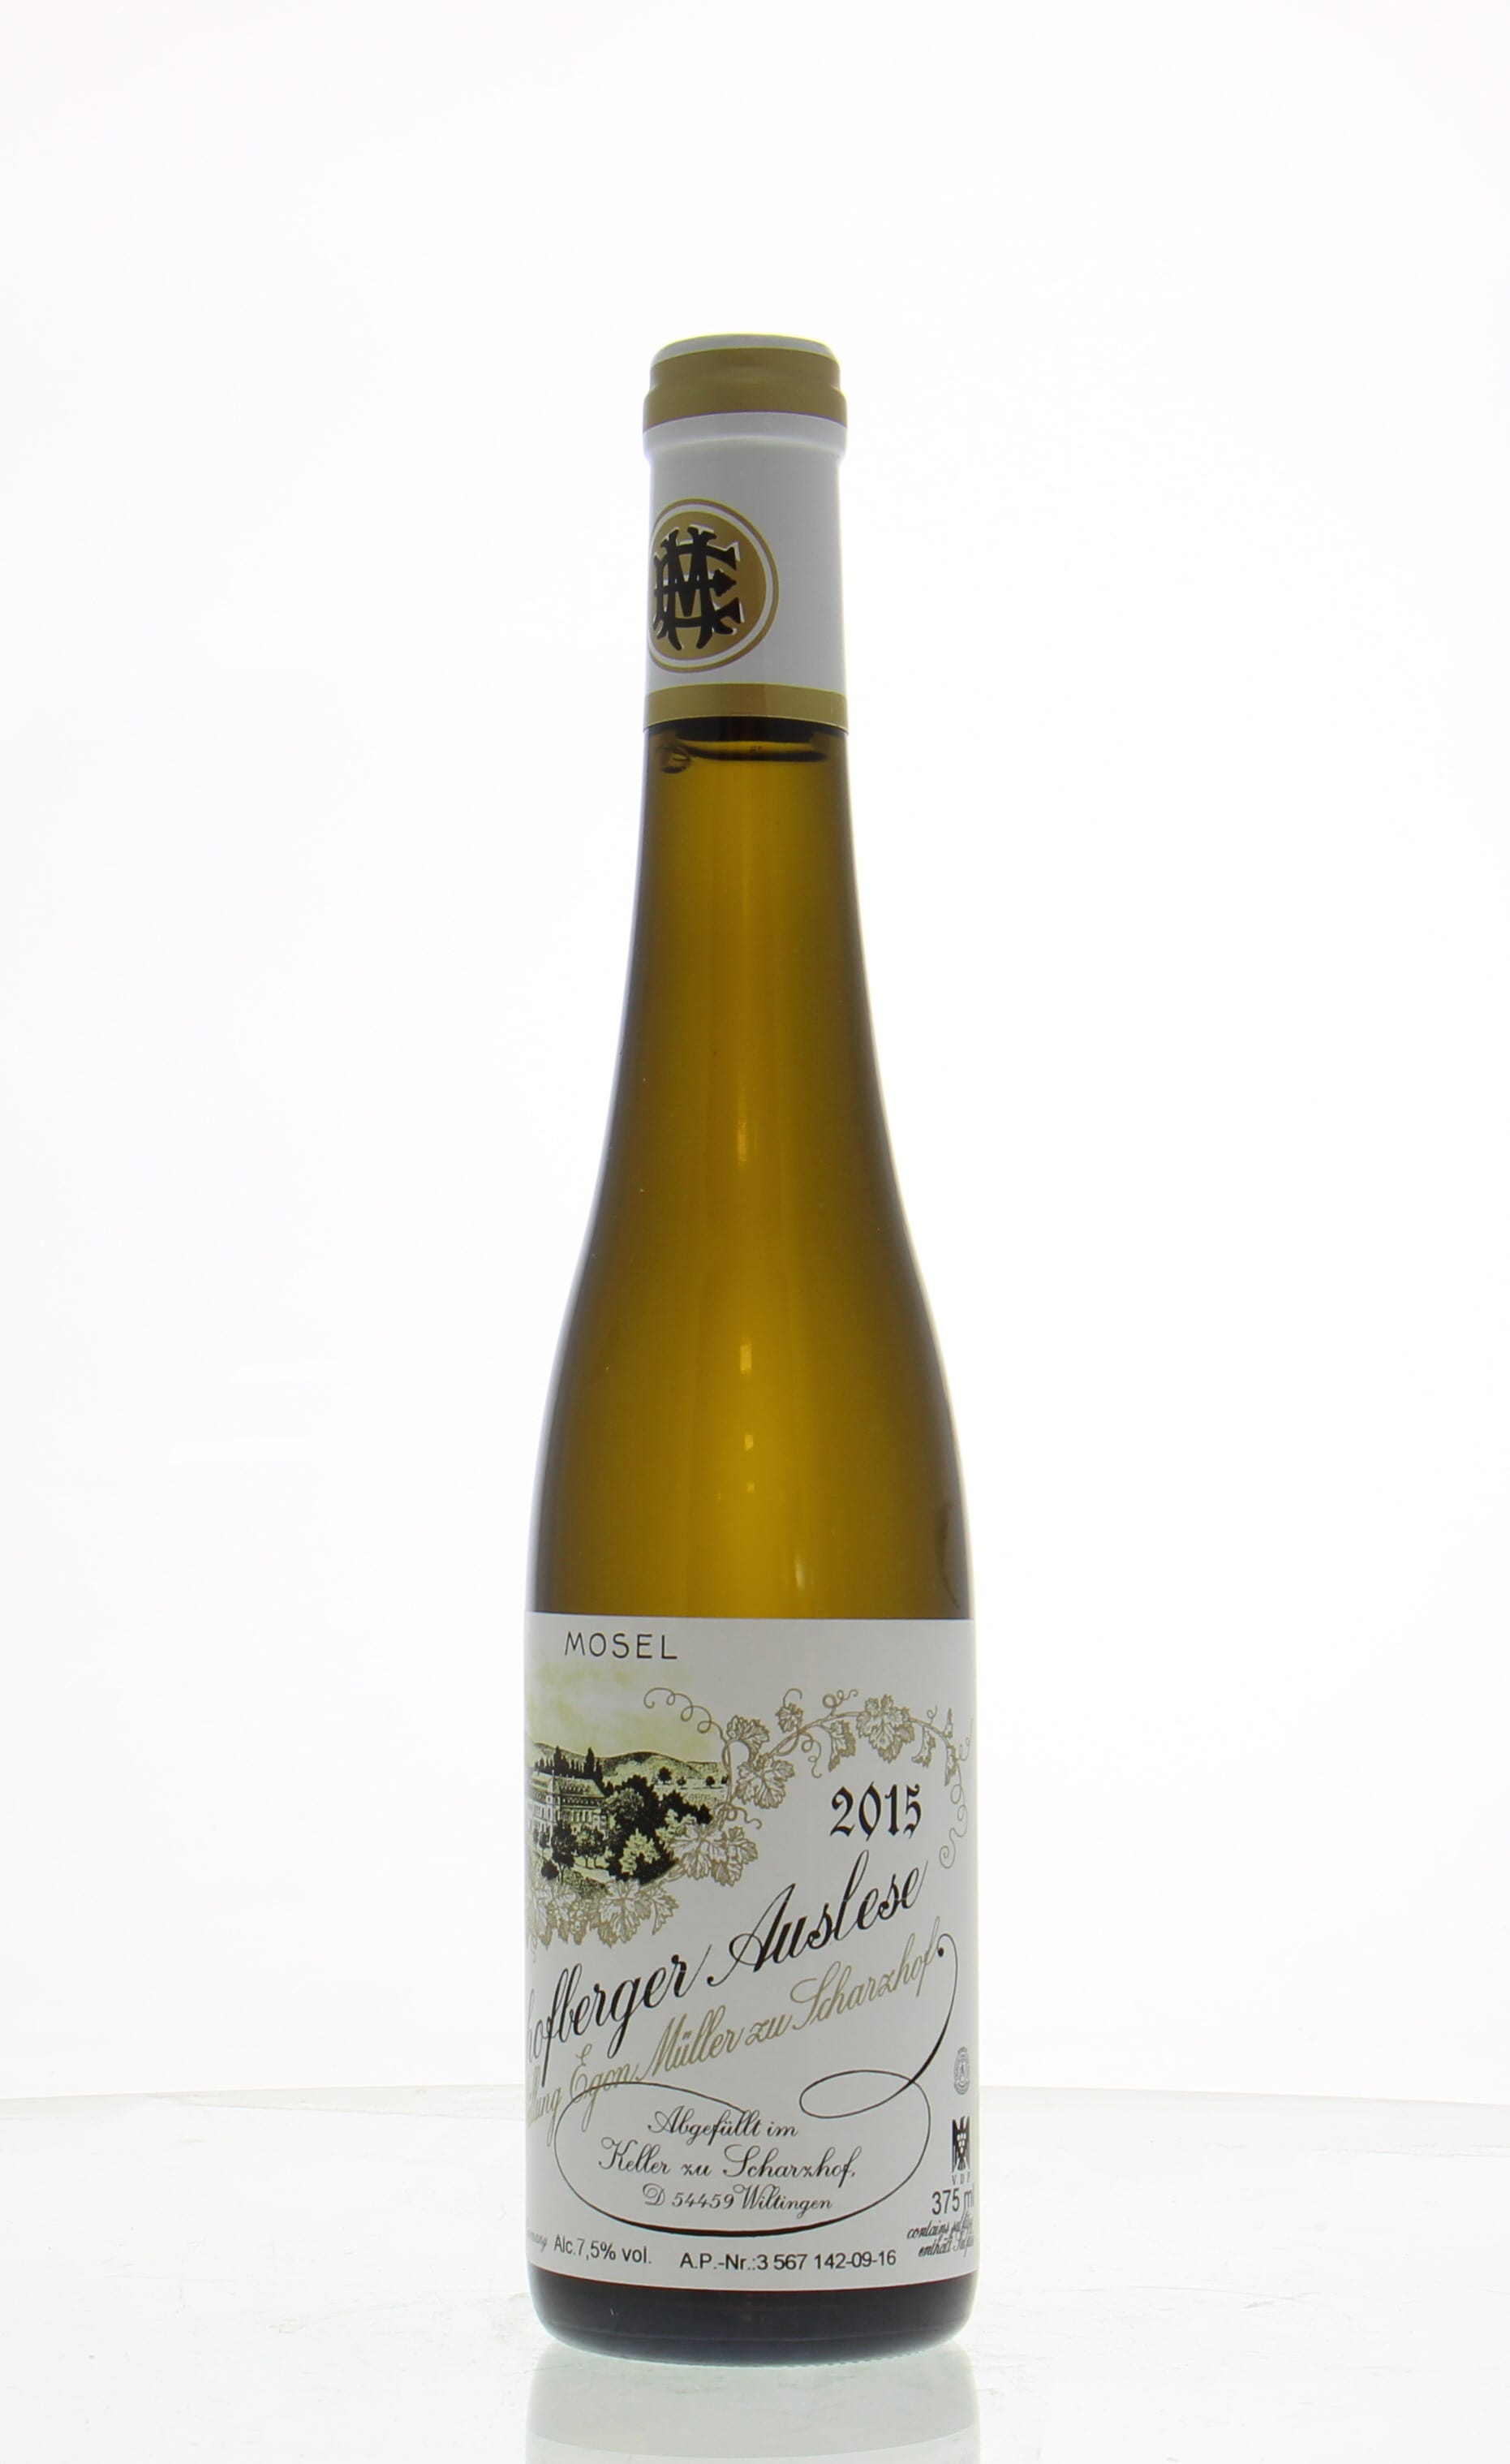 Egon Muller - Scharzhofberger Riesling Auslese 2015 Perfect